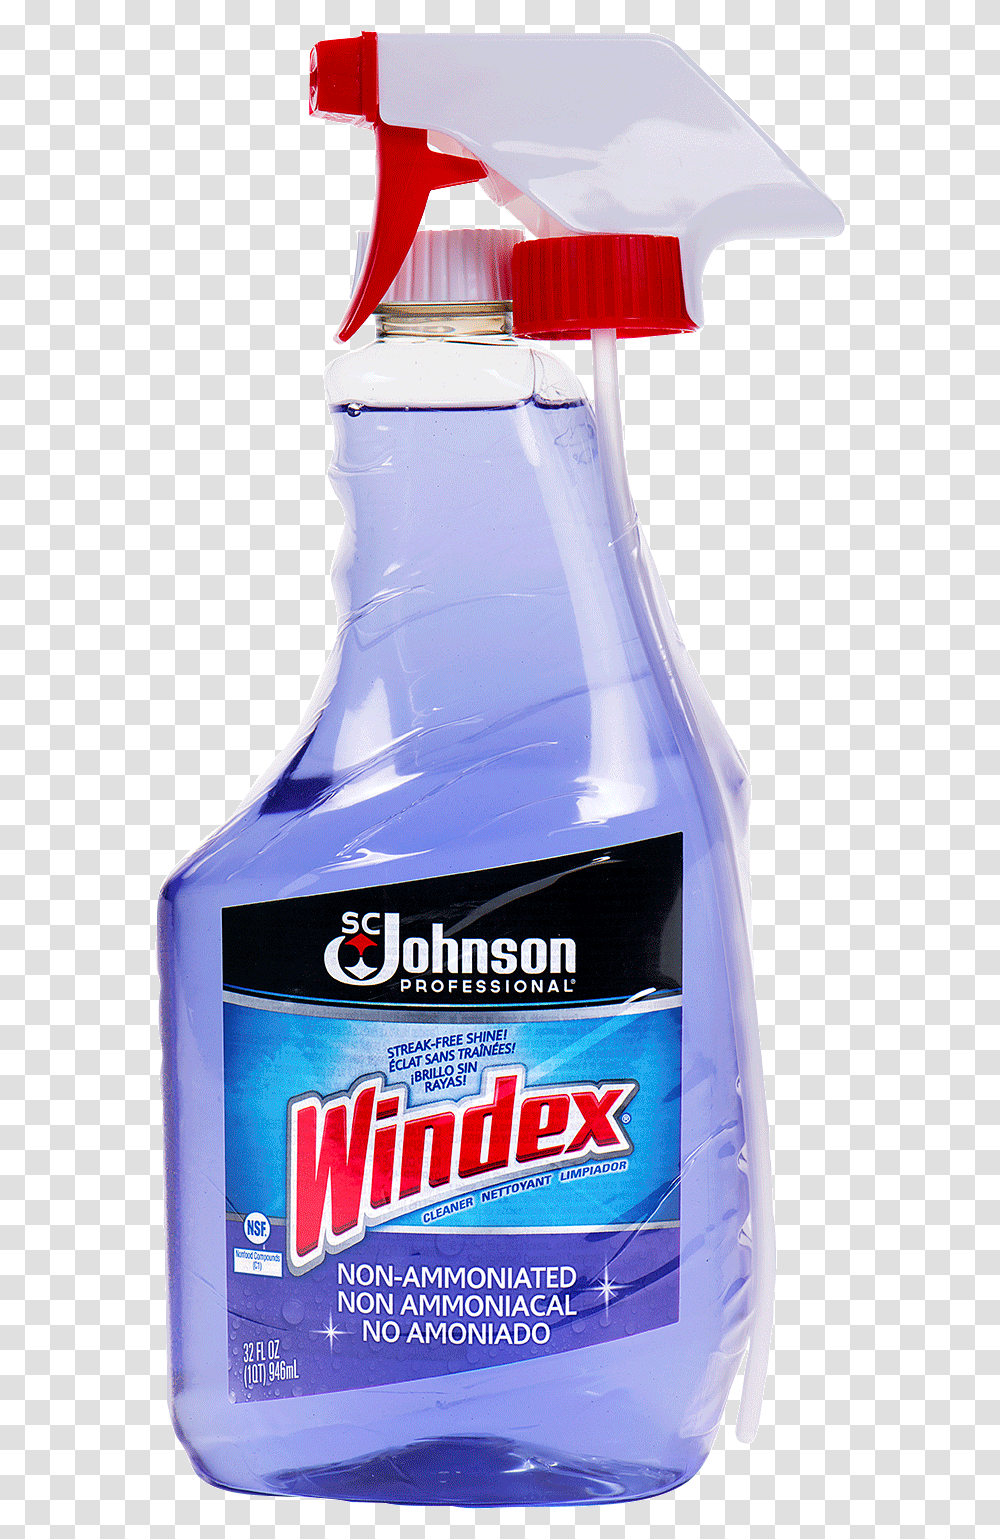 Windex Na Cap Spray1500x1500 Windex Non Ammoniated 32oz Trigger, Bottle, Cosmetics, Ink Bottle, Aftershave Transparent Png